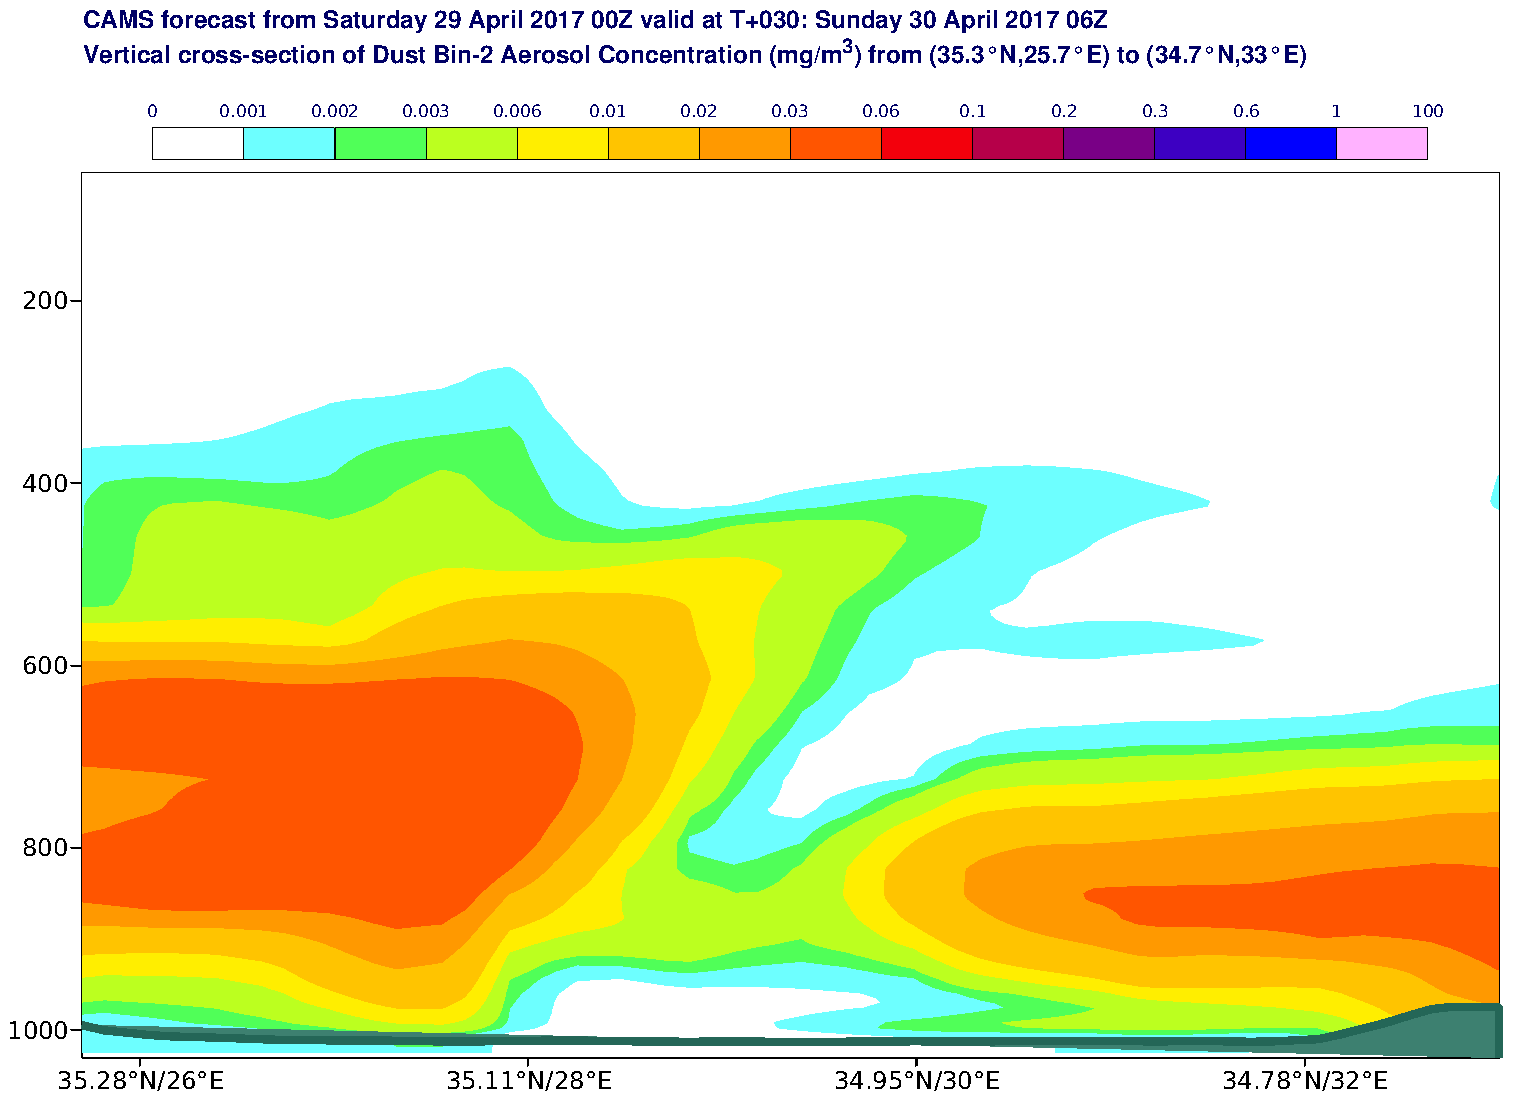 Vertical cross-section of Dust Bin-2 Aerosol Concentration (mg/m3) valid at T30 - 2017-04-30 06:00